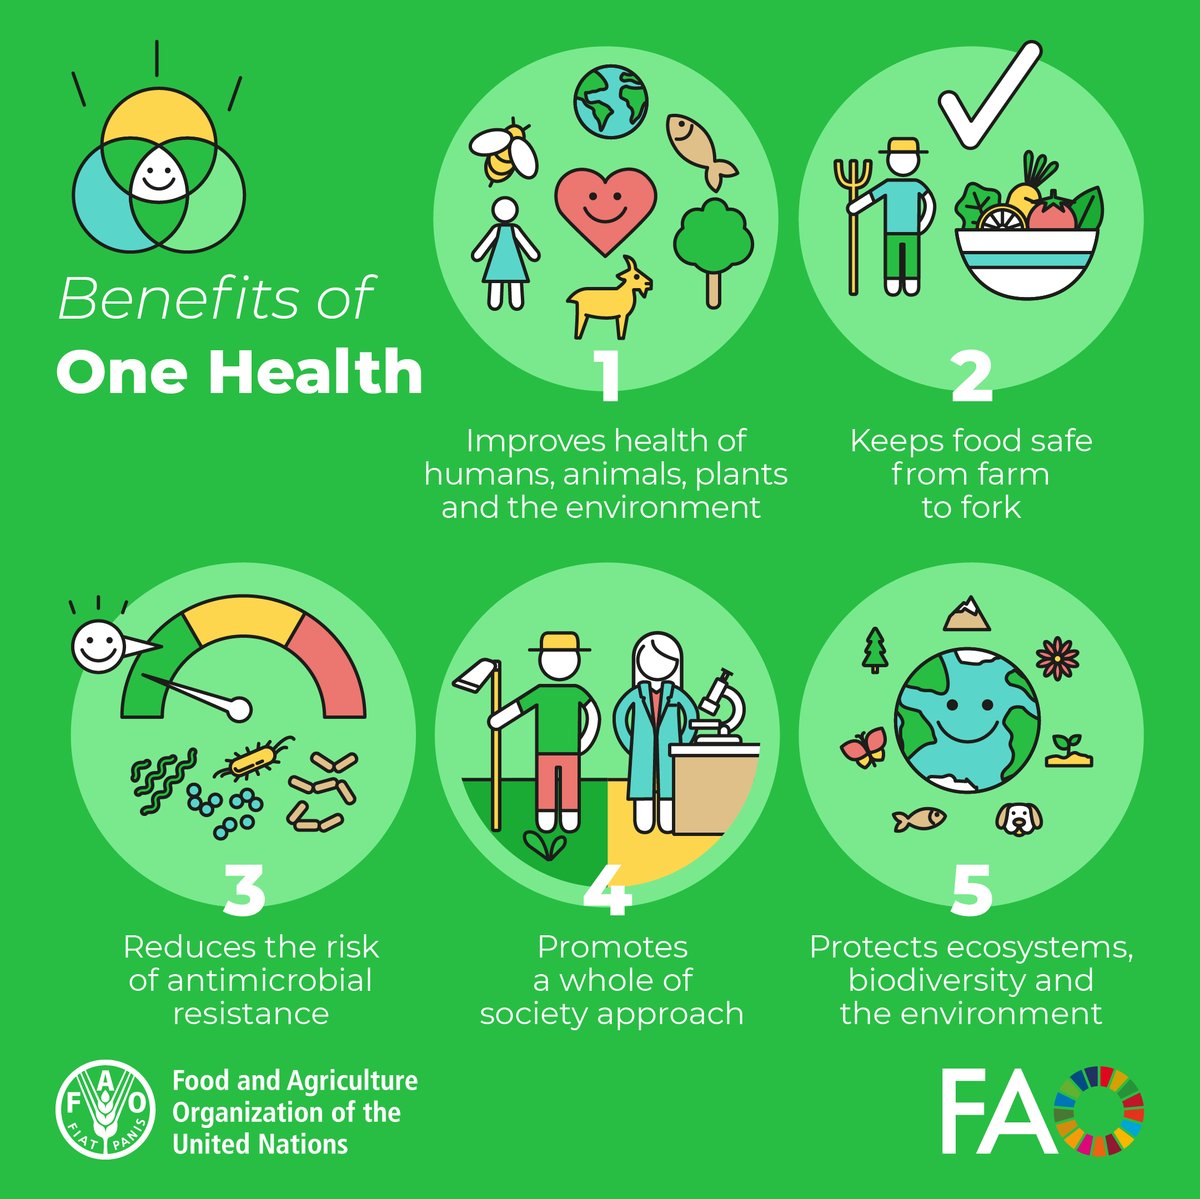 To build a better future for all, we need to address global health issues by collaborating across all sectors. Because human, animal, plant, and environmental health are all inextricably linked. Let's work together for #OneHealth! #WorldVeterinaryDay #OneHealth